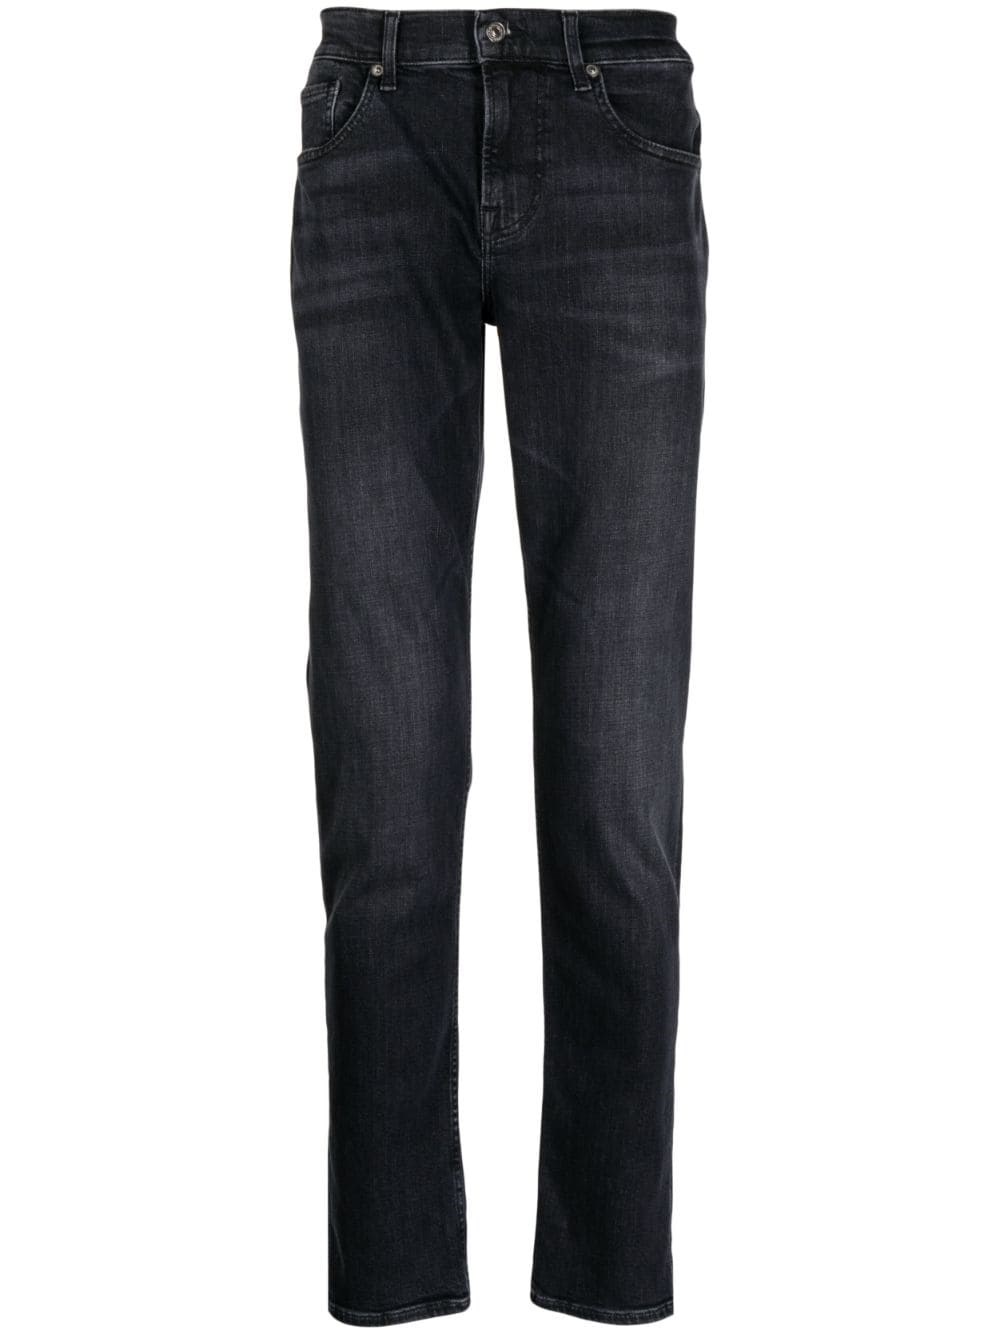 7 FOR ALL MANKIND `SLIMMY TAPERED STRETCH TEK IDEALIST` JEANS